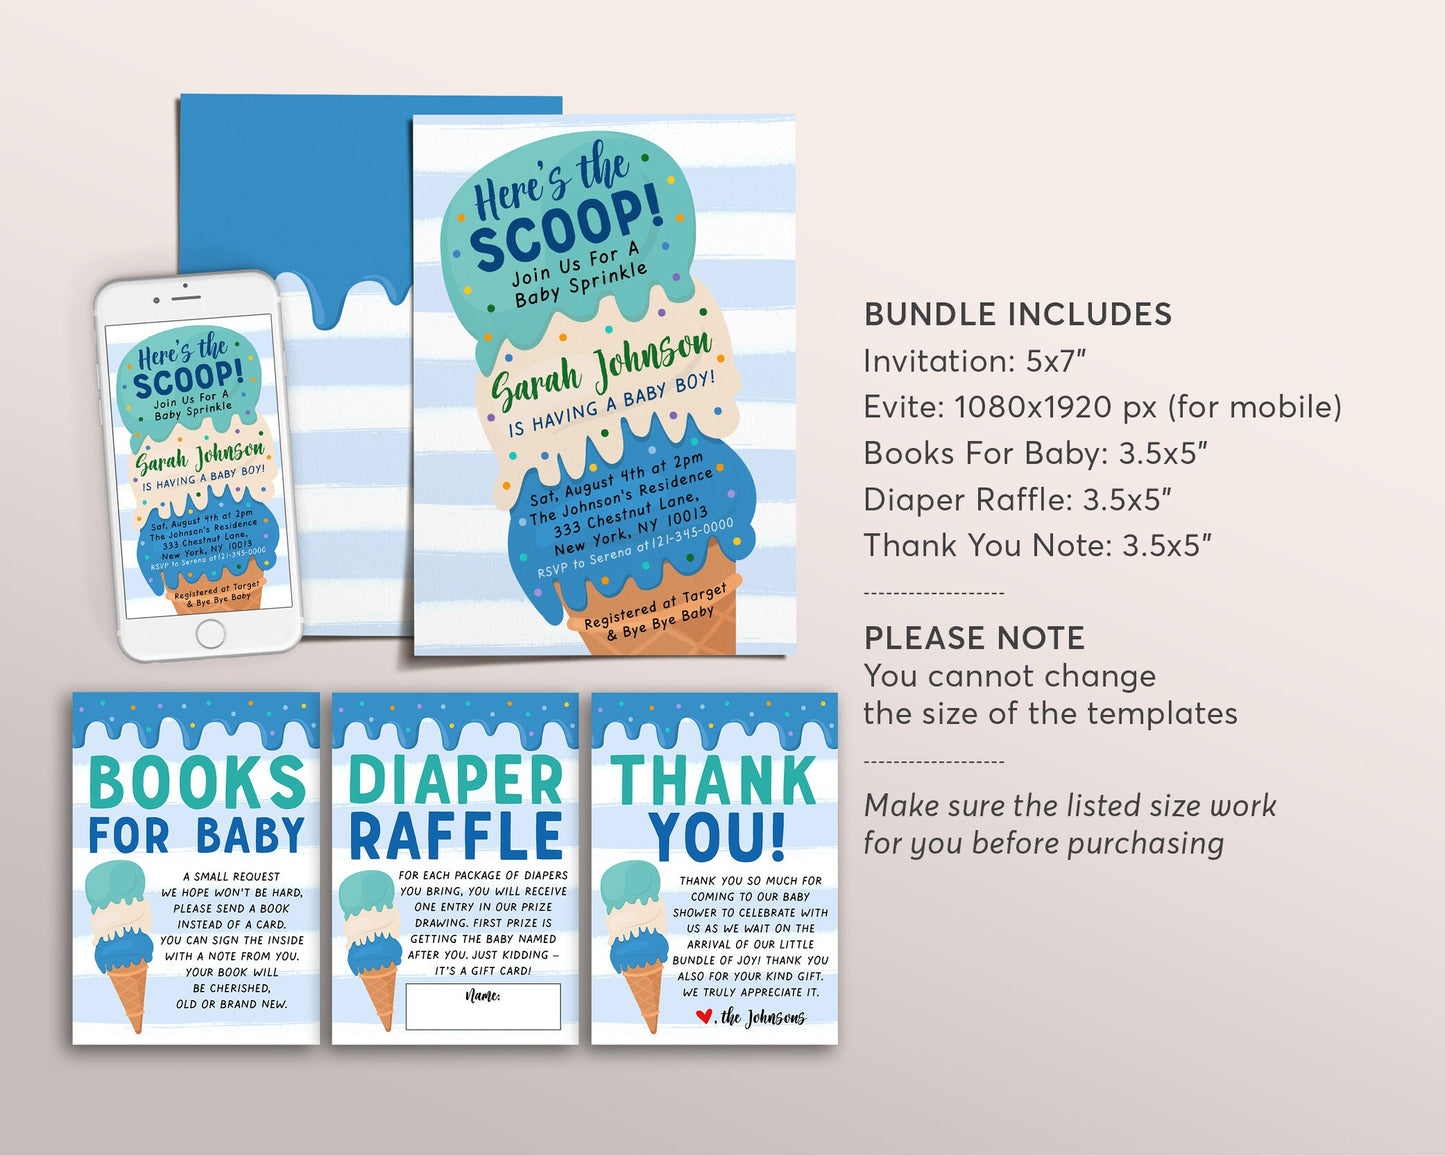 Ice Cream BOY Baby Shower Invitation BUNDLE Suite Set Editable Template, Here's the Scoop Baby Sprinkle Invite, Book Request Diaper Raffle